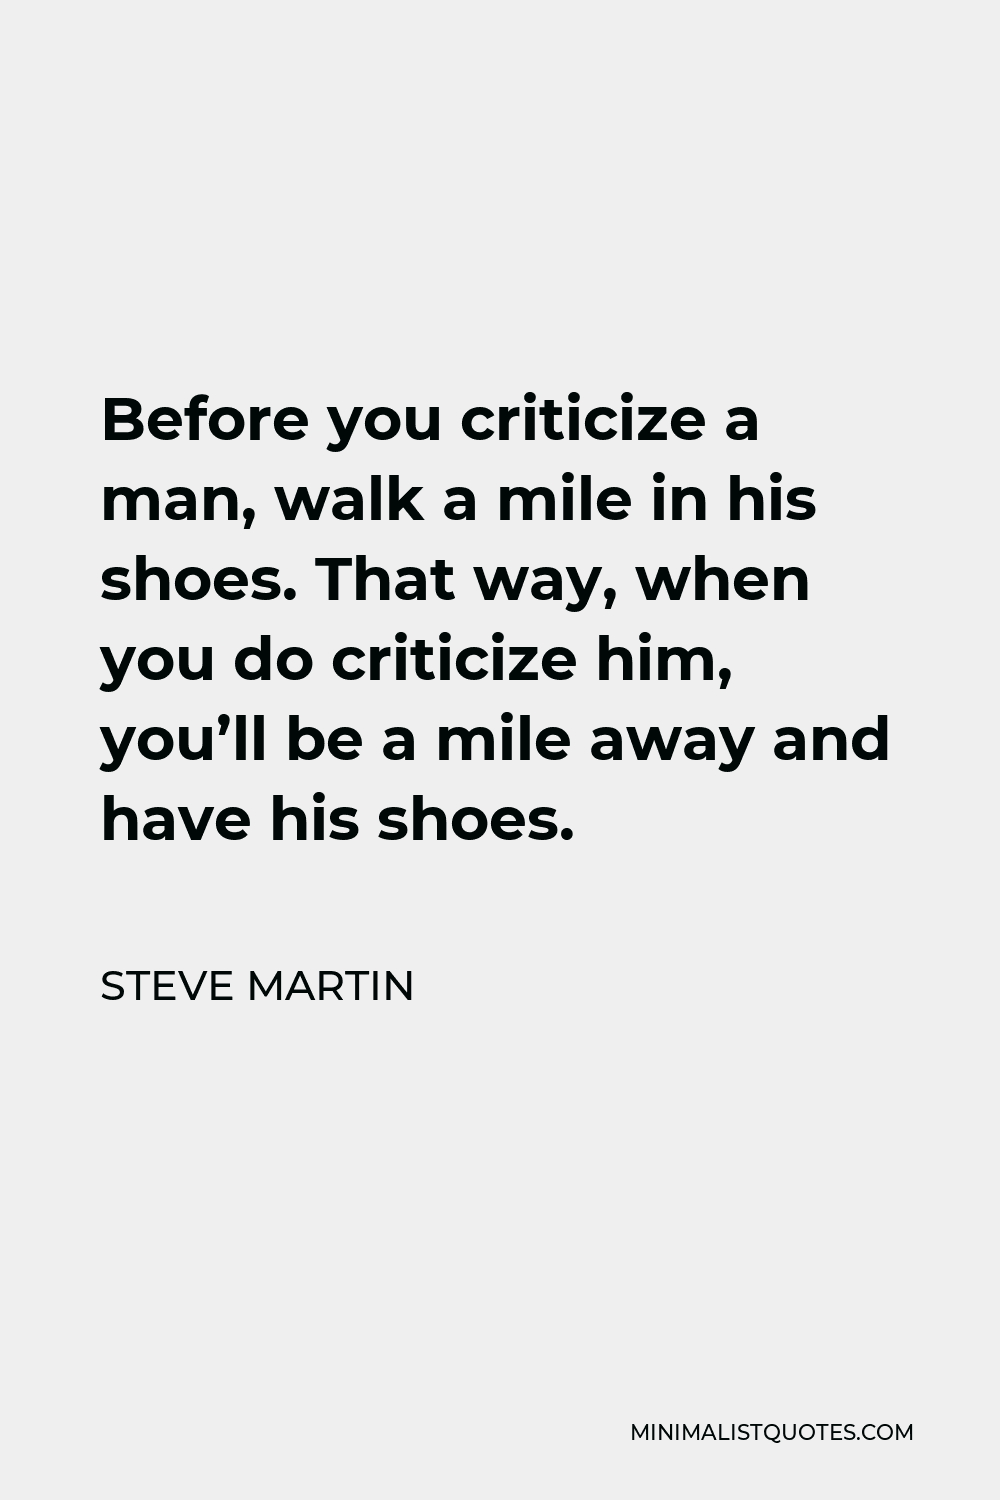 Steve Martin Quote - Before you criticize a man, walk a mile in his shoes. That way, when you do criticize him, you’ll be a mile away and have his shoes.